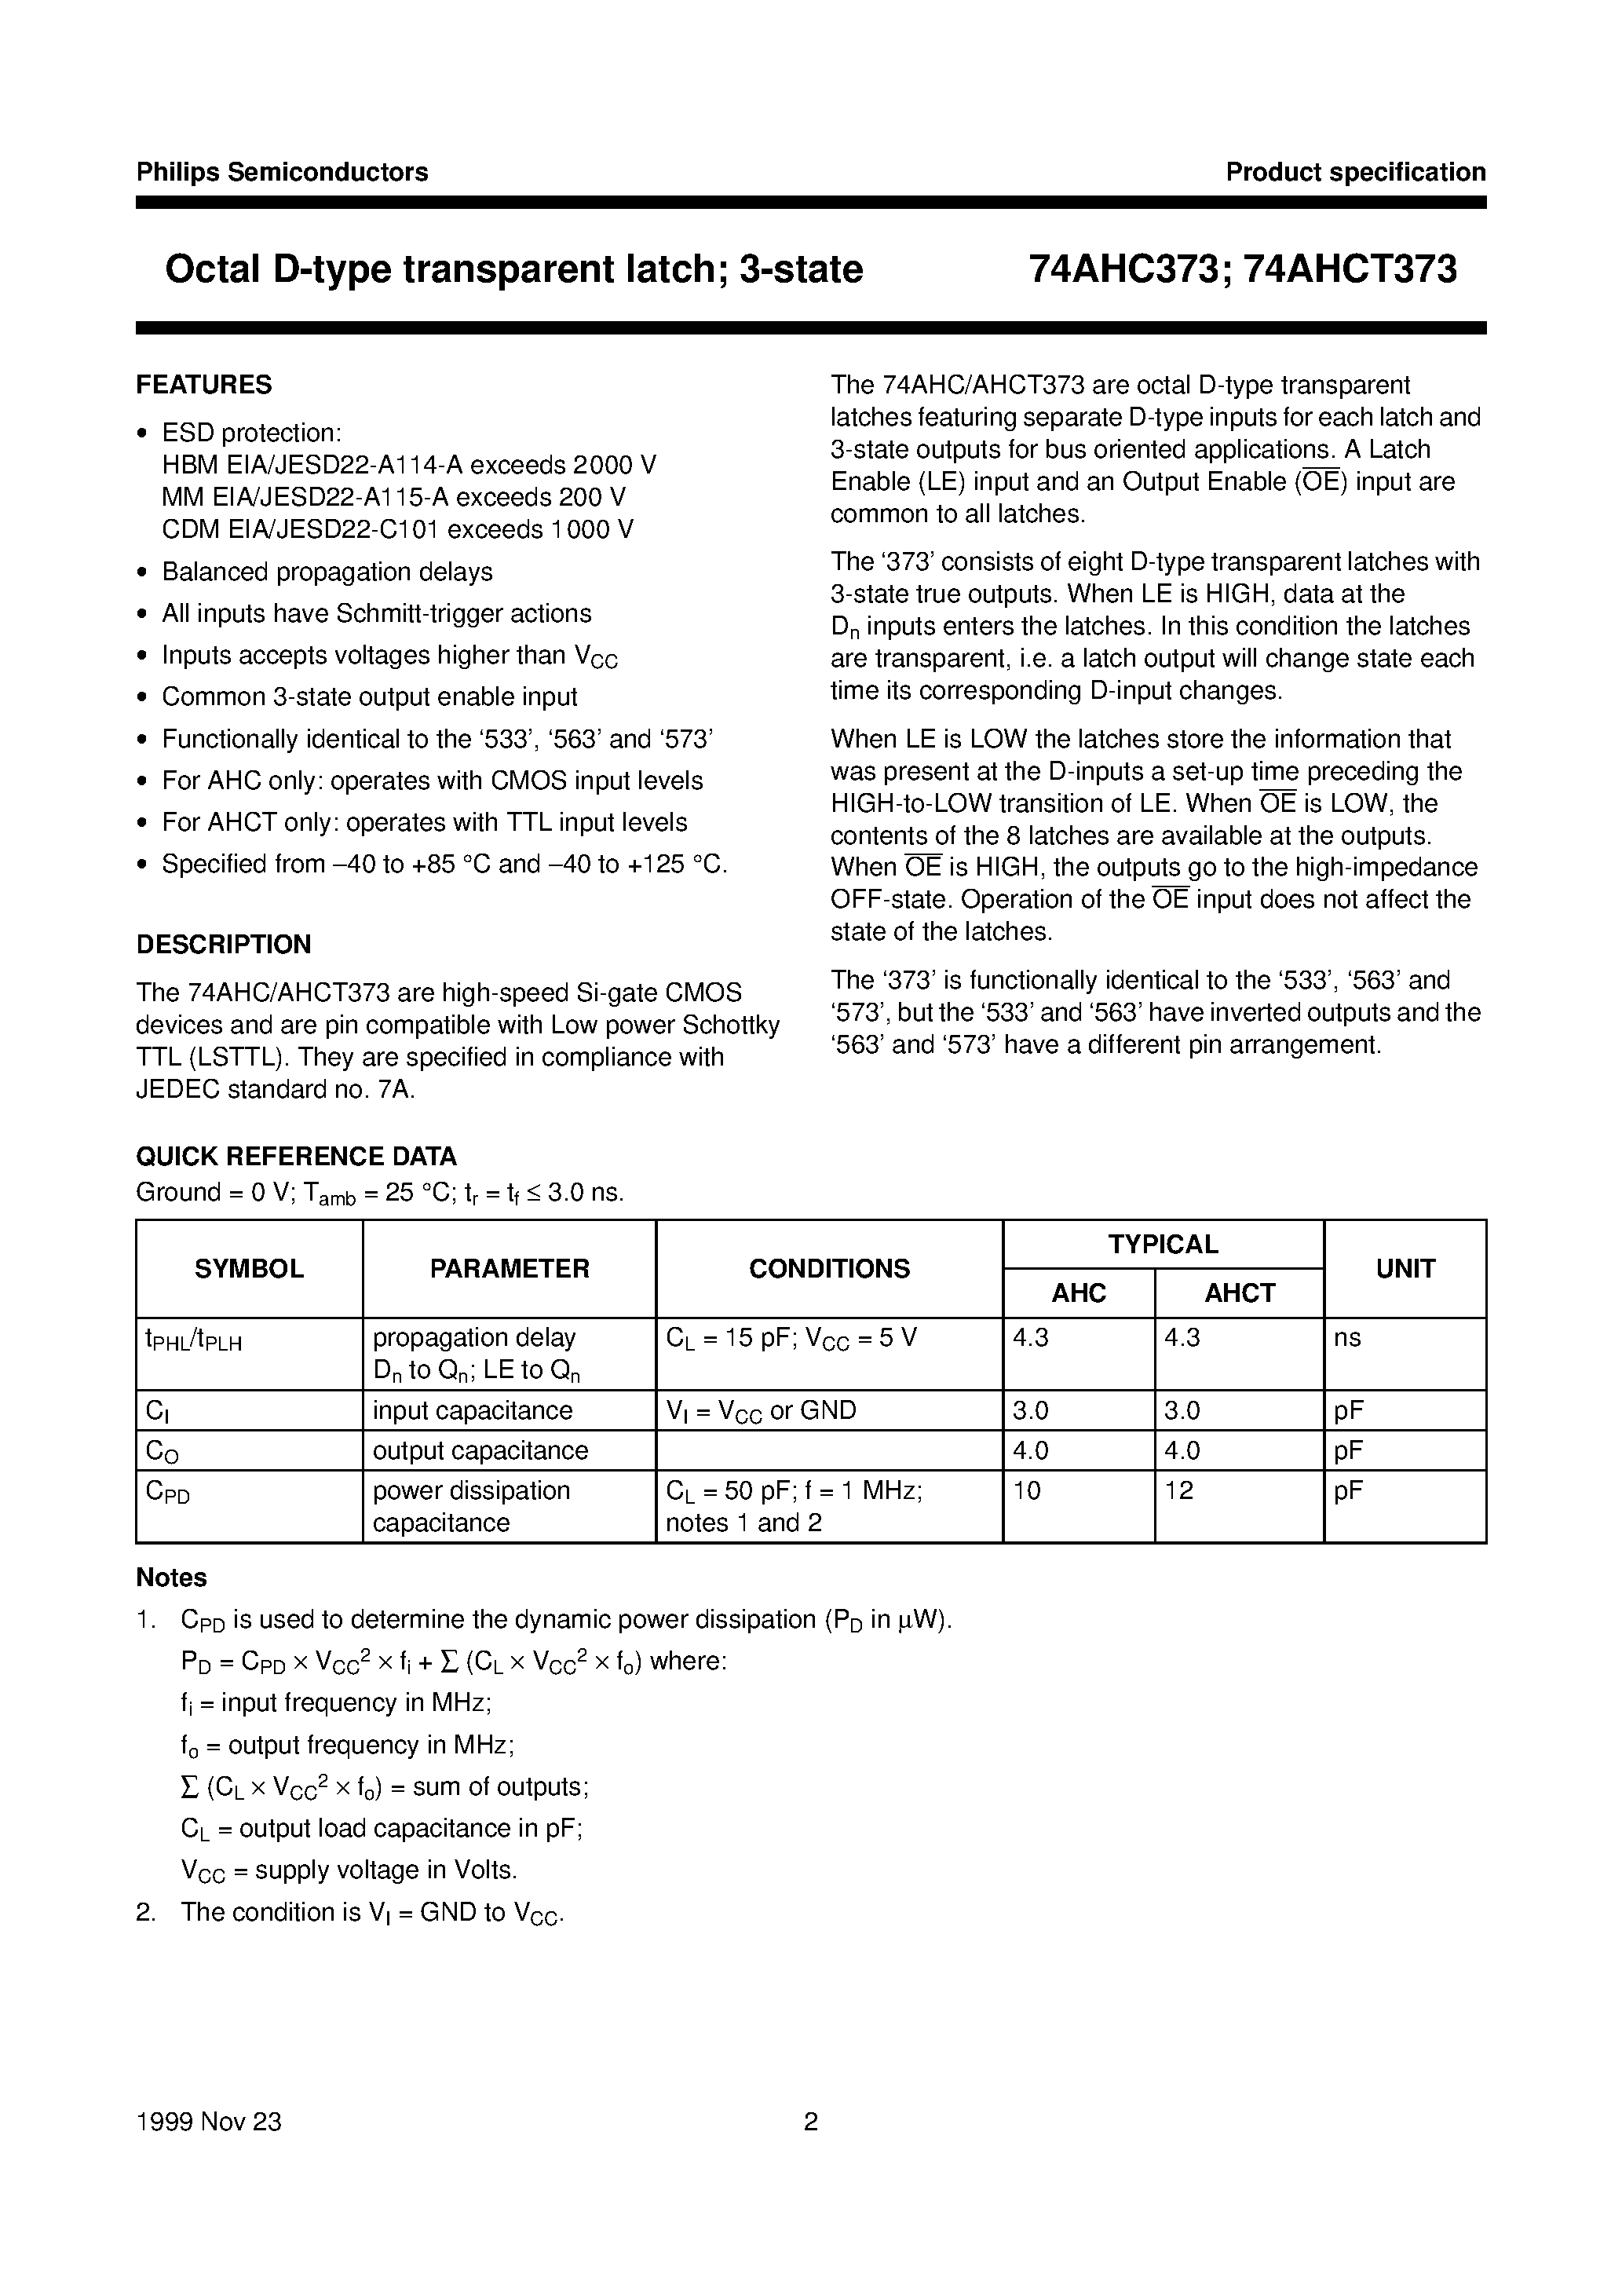 Datasheet 74AHCT373D - Octal D-type transparent latch; 3-state page 2